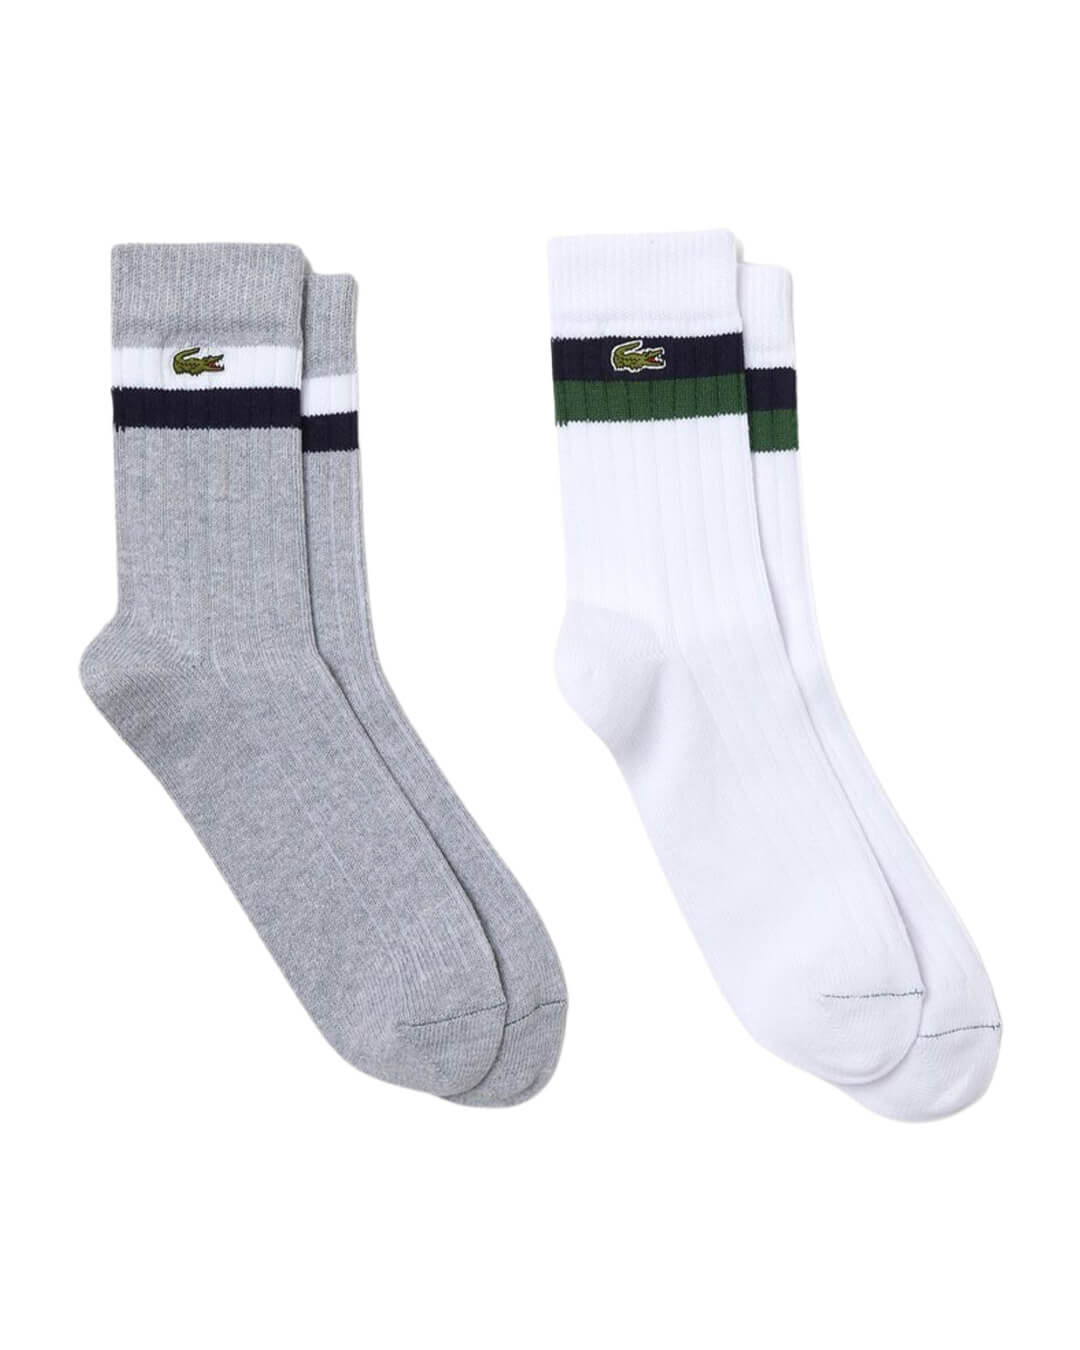 Lacoste Socks Lacoste Unisex High-Cut Striped Ribbed Cotton Grey Socks Two-Pack